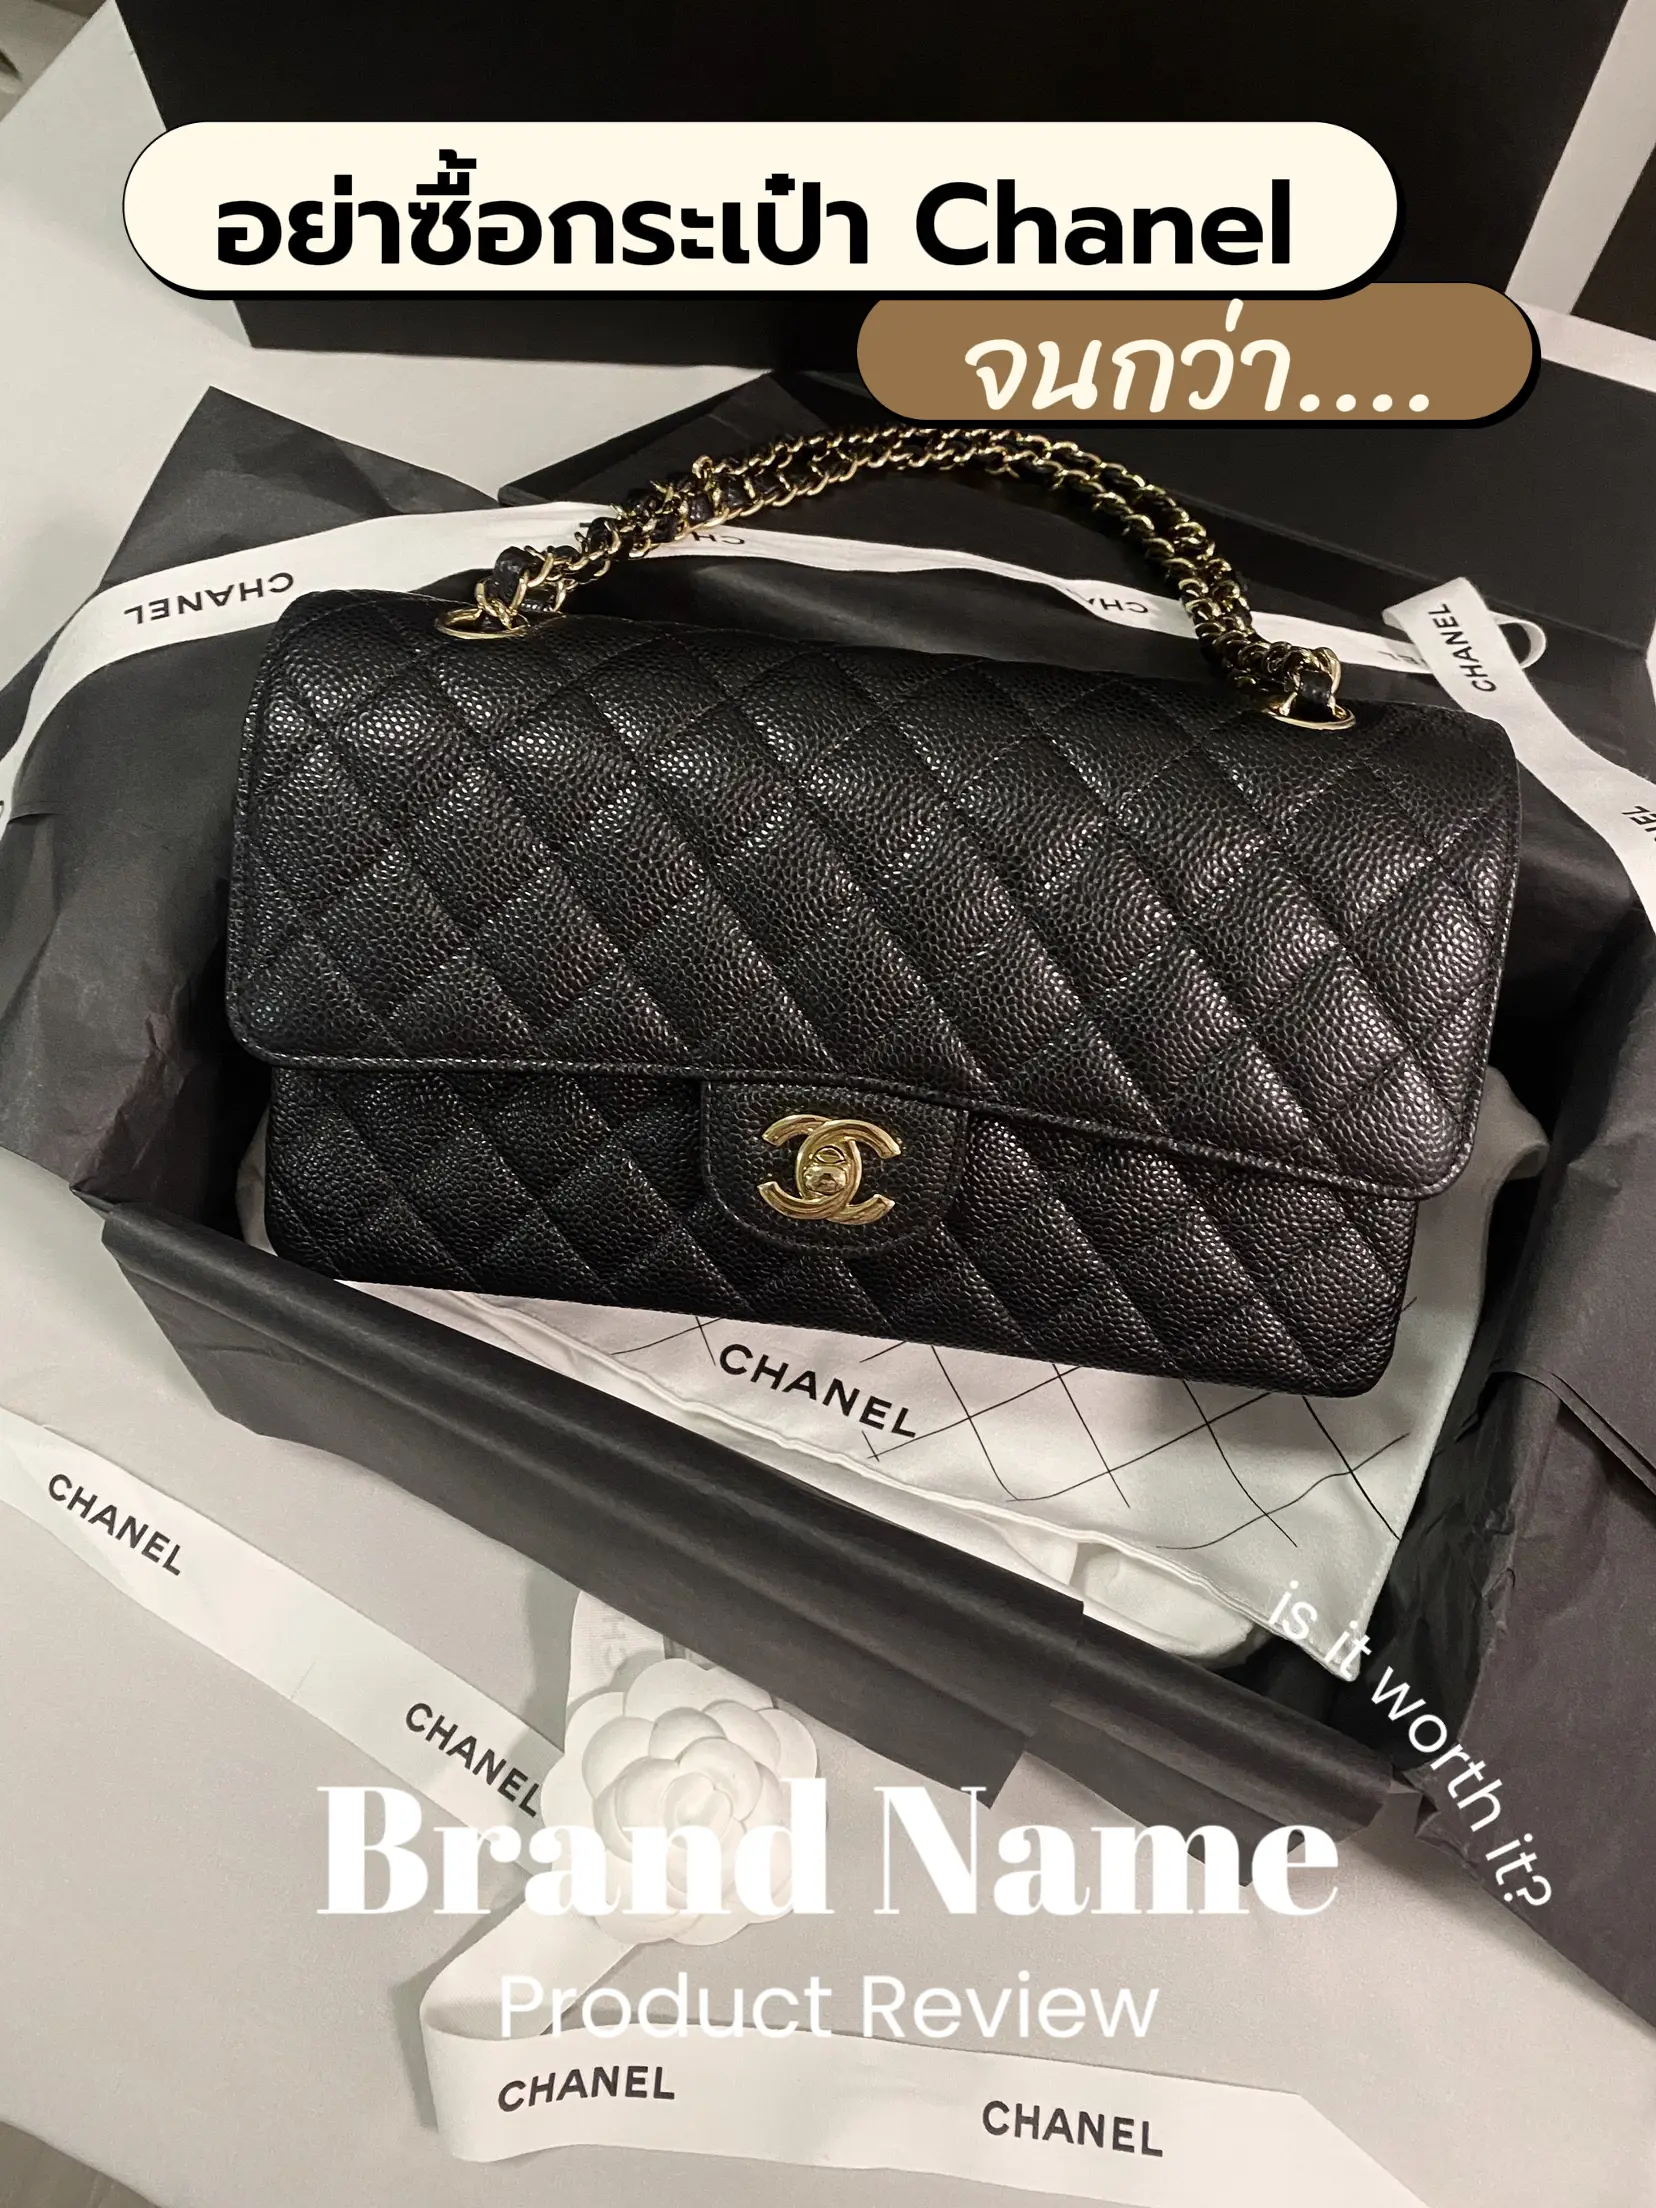 Don't buy Chanel bags., Gallery posted by RinnnLi